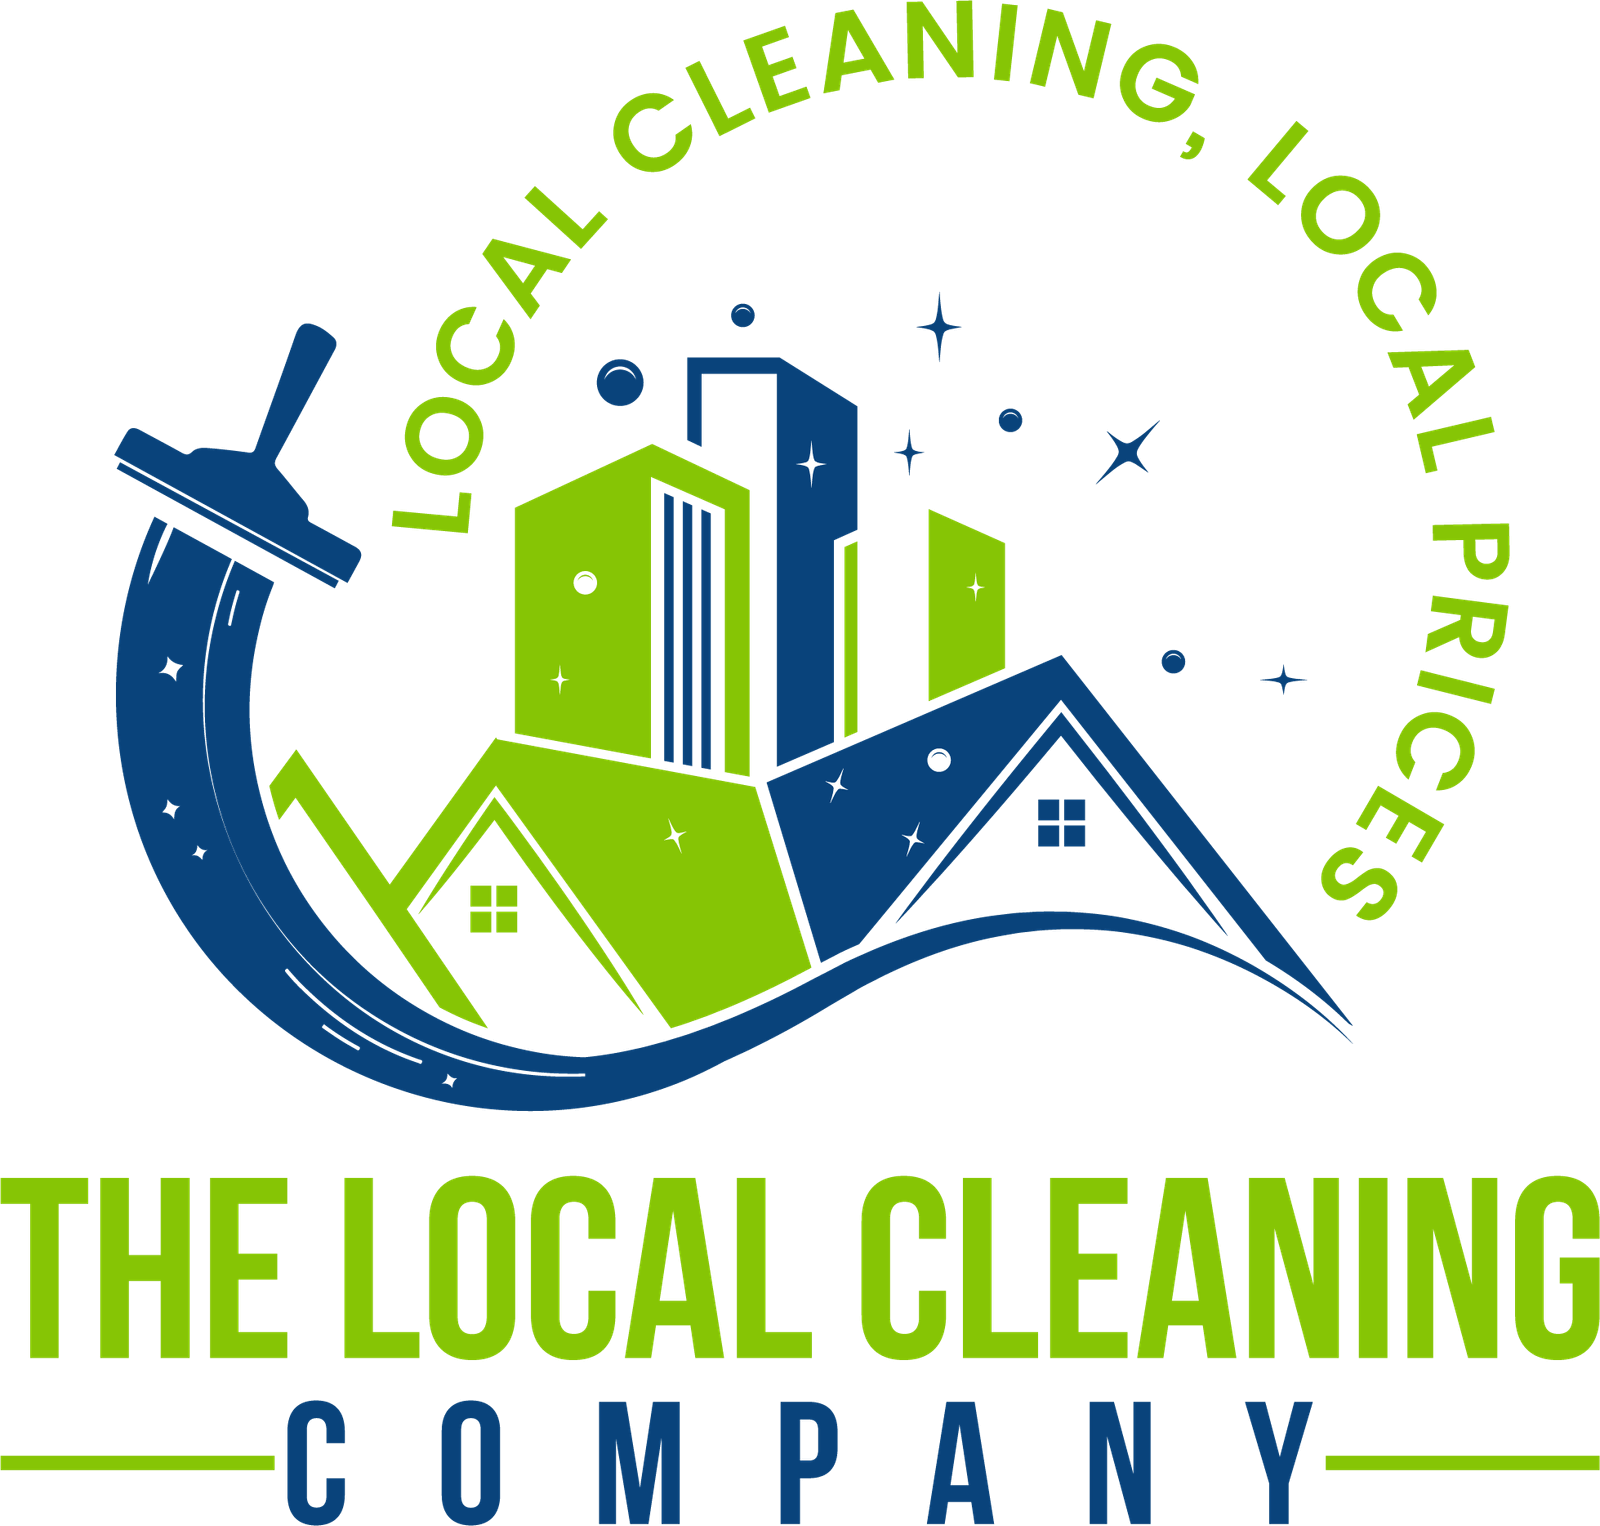 The Local Cleaning Company - Trusted for Quality Cleaning Services